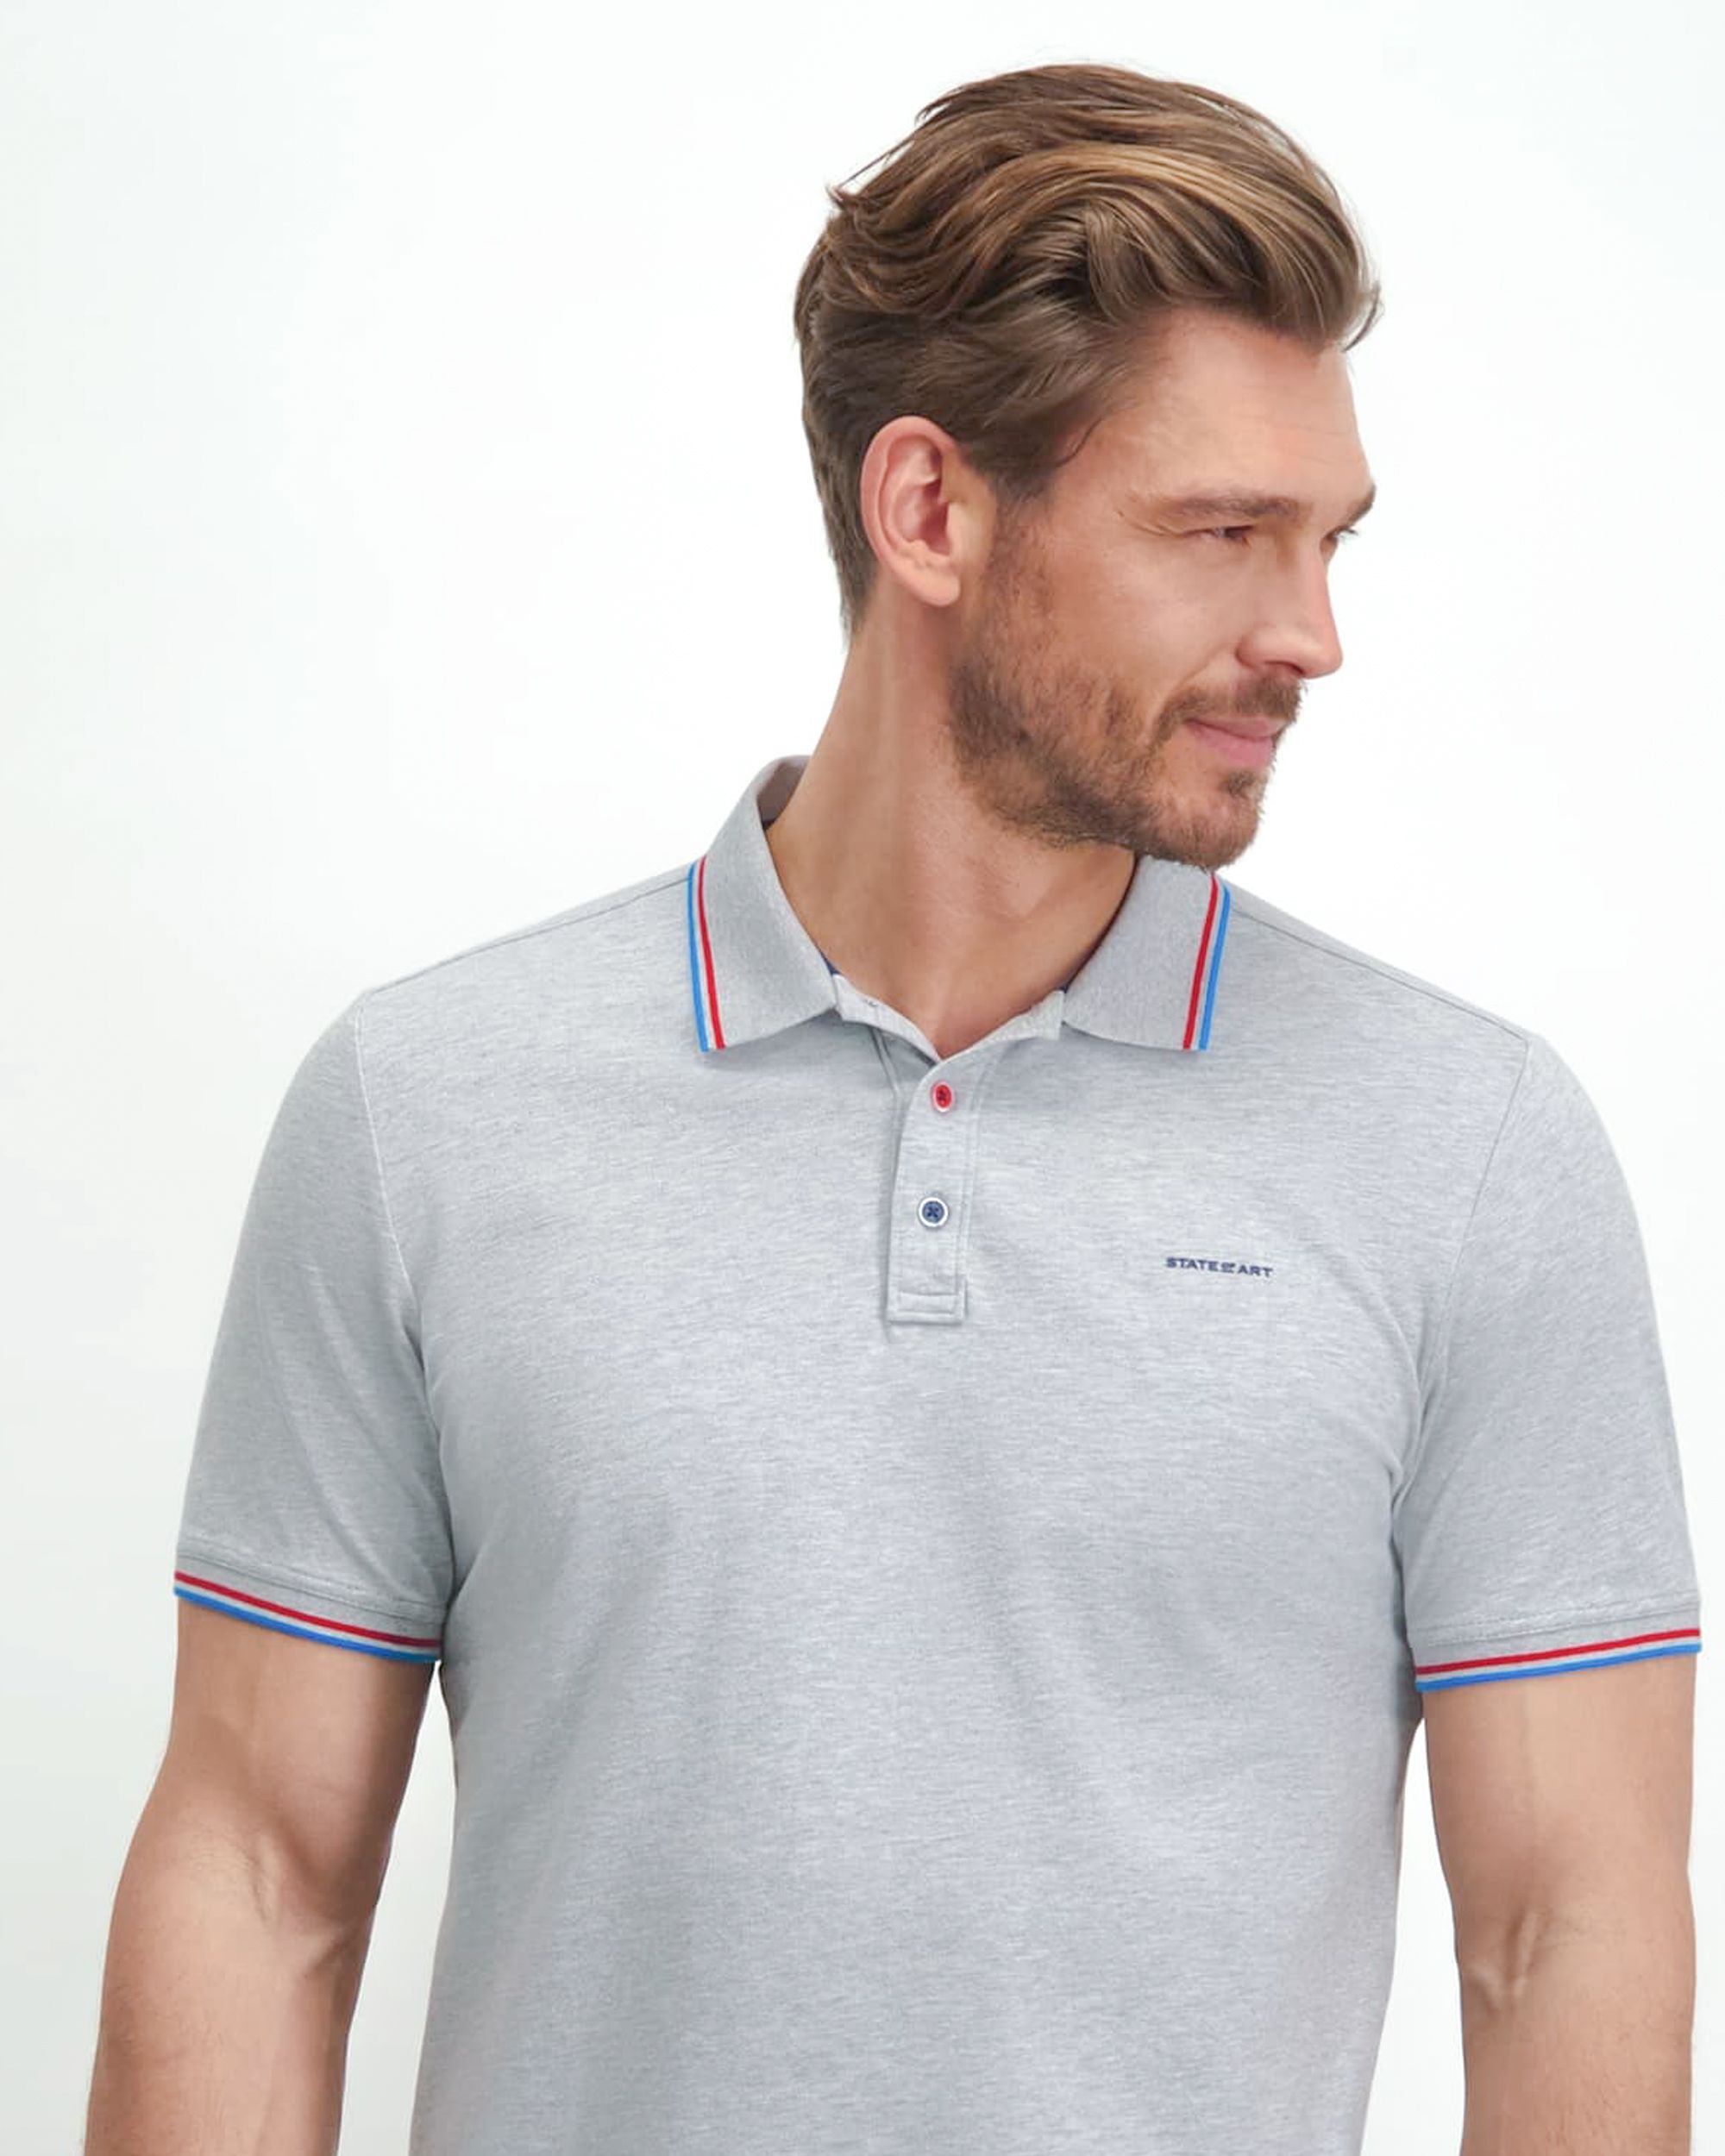 Pidgin middag uitzetten State of Art Polo KM | Shop nu - Only for Men